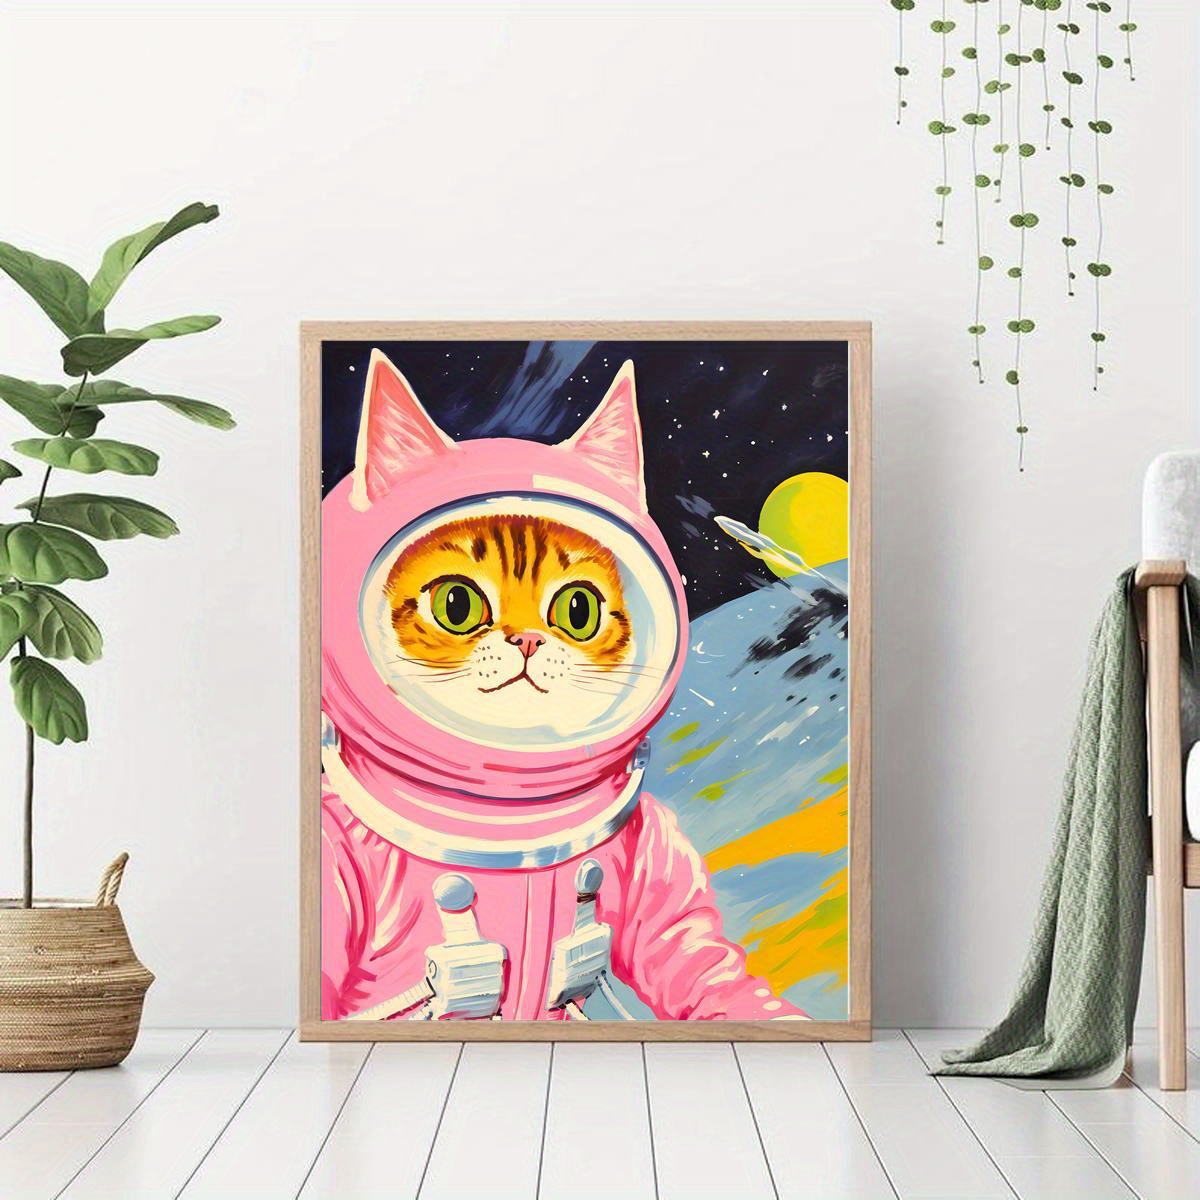 

Retro Pink Cat Astronaut Canvas Art Print - Colorful & Cute Whimsical Space Wall Decor For Living Room, Bedroom, Home Office - Unframed Modern/classic Animal Theme Poster